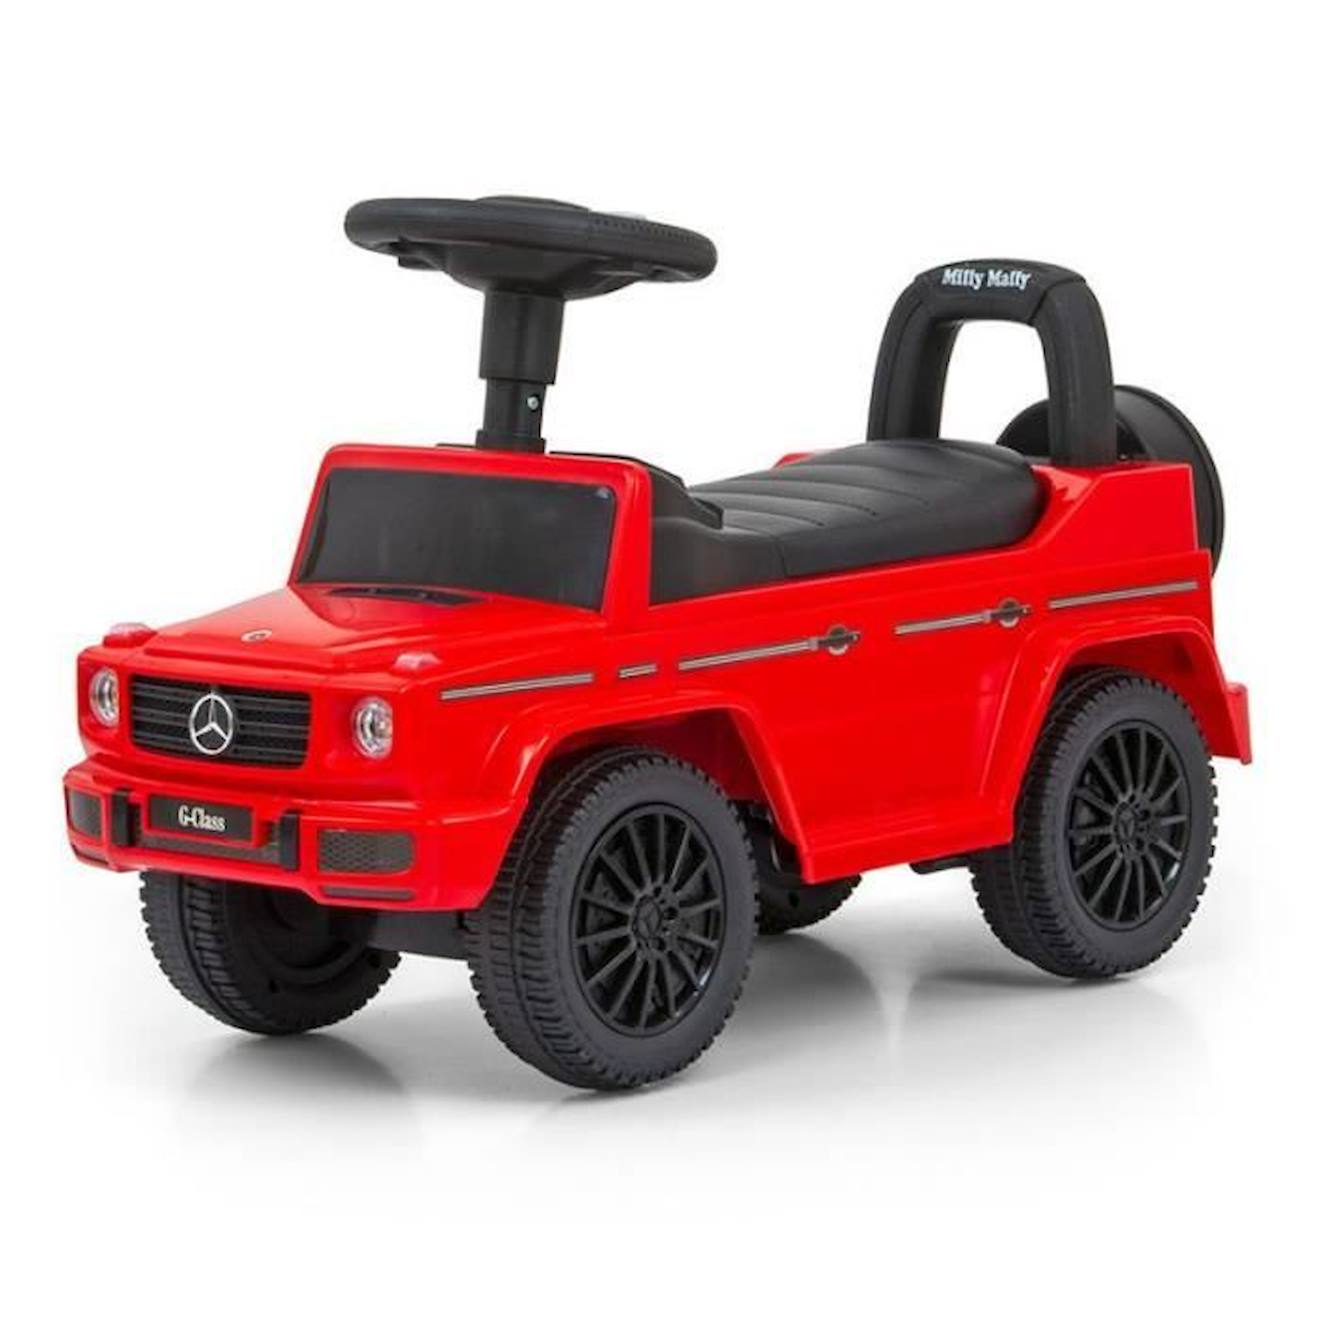 Porteur Enfant Milly Mally Mercedes G350d S Rouge - 4 Roues - Licence Mercedes Rouge